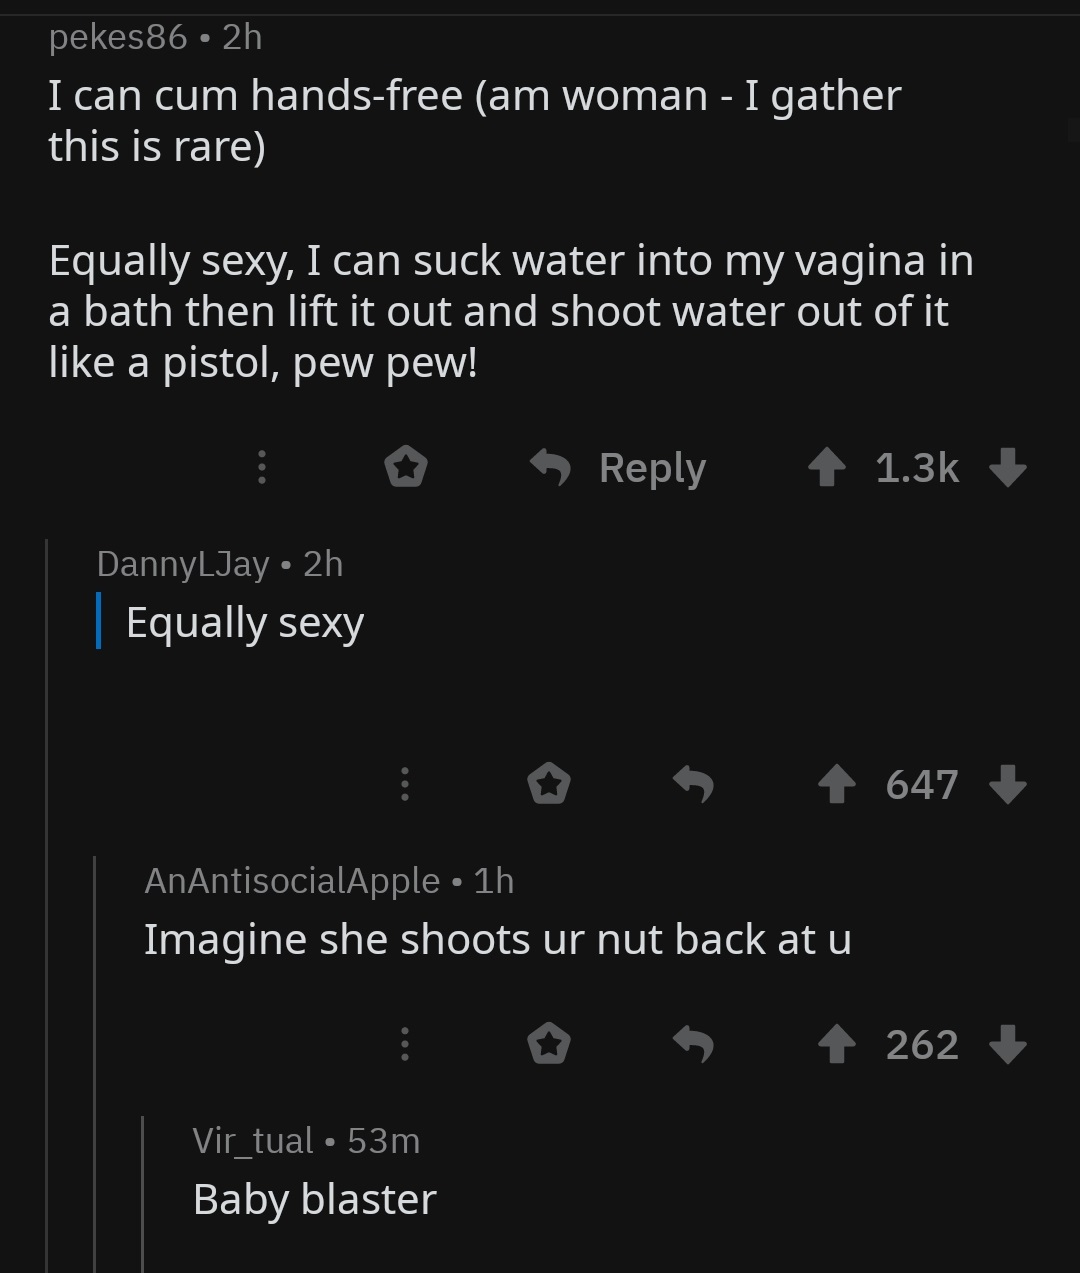 screenshot - pekes86 2h I can cum handsfree am woman I gather this is rare Equally sexy, I can suck water into my vagina in a bath then lift it out and shoot water out of it a pistol, pew pew! 1 DannyLJay 2h | Equally sexy 647 AnAntisocialApple 1h Imagine